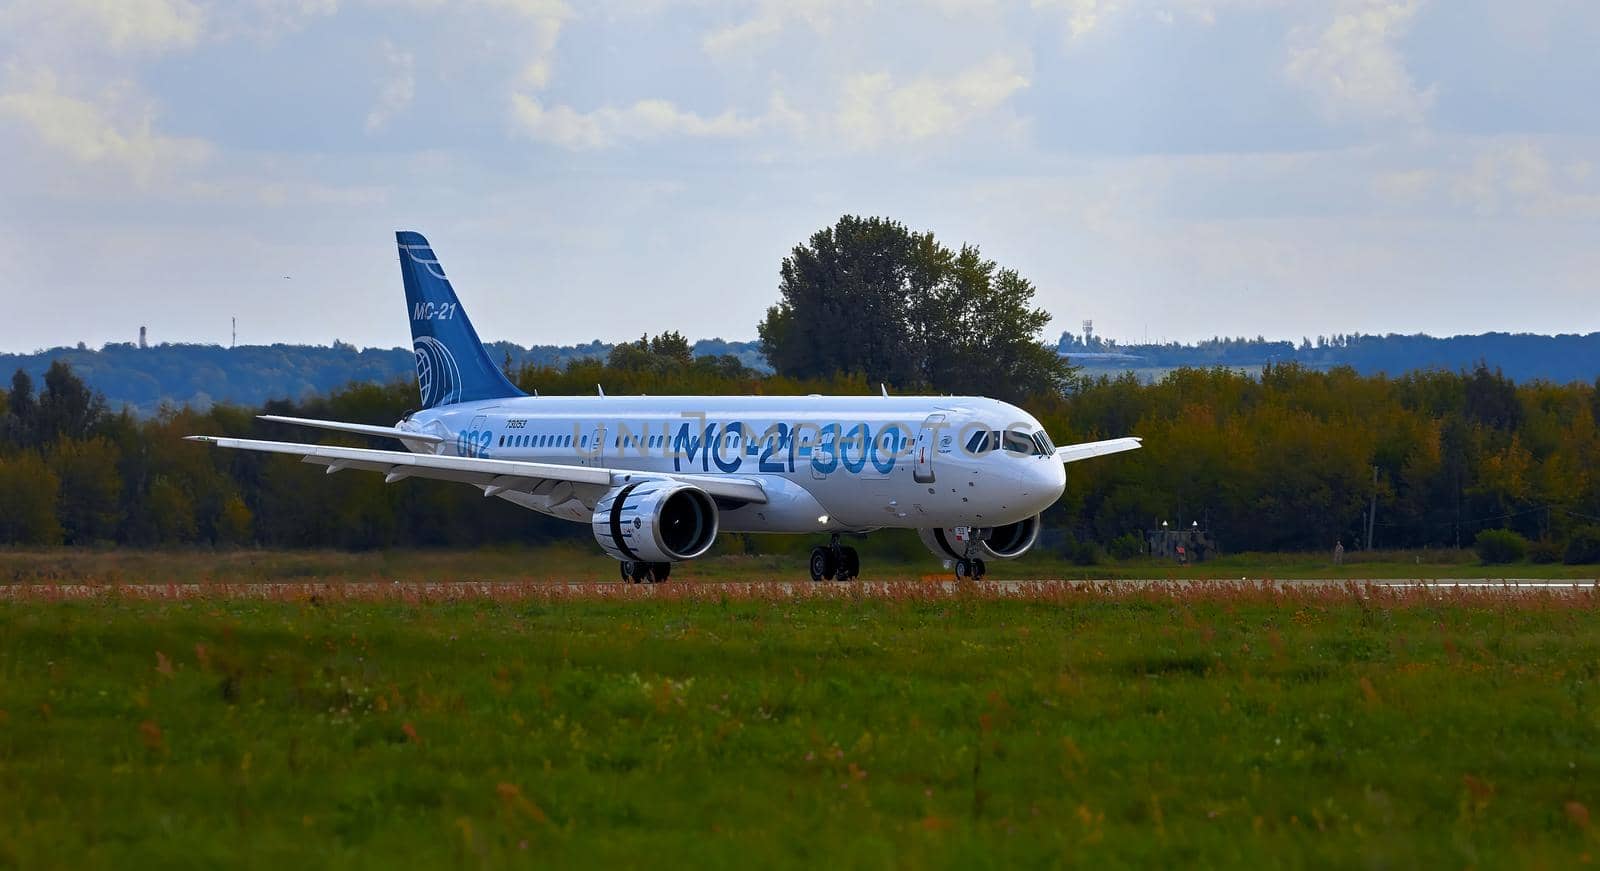 New Russian passenger aircraft MS-21-300 flying prototype of a new Russian civil airliner during test flights on MAKS 2019 airshow. ZHUKOVSKY, RUSSIA, AUGUST 27, 2019 by EvgeniyQW